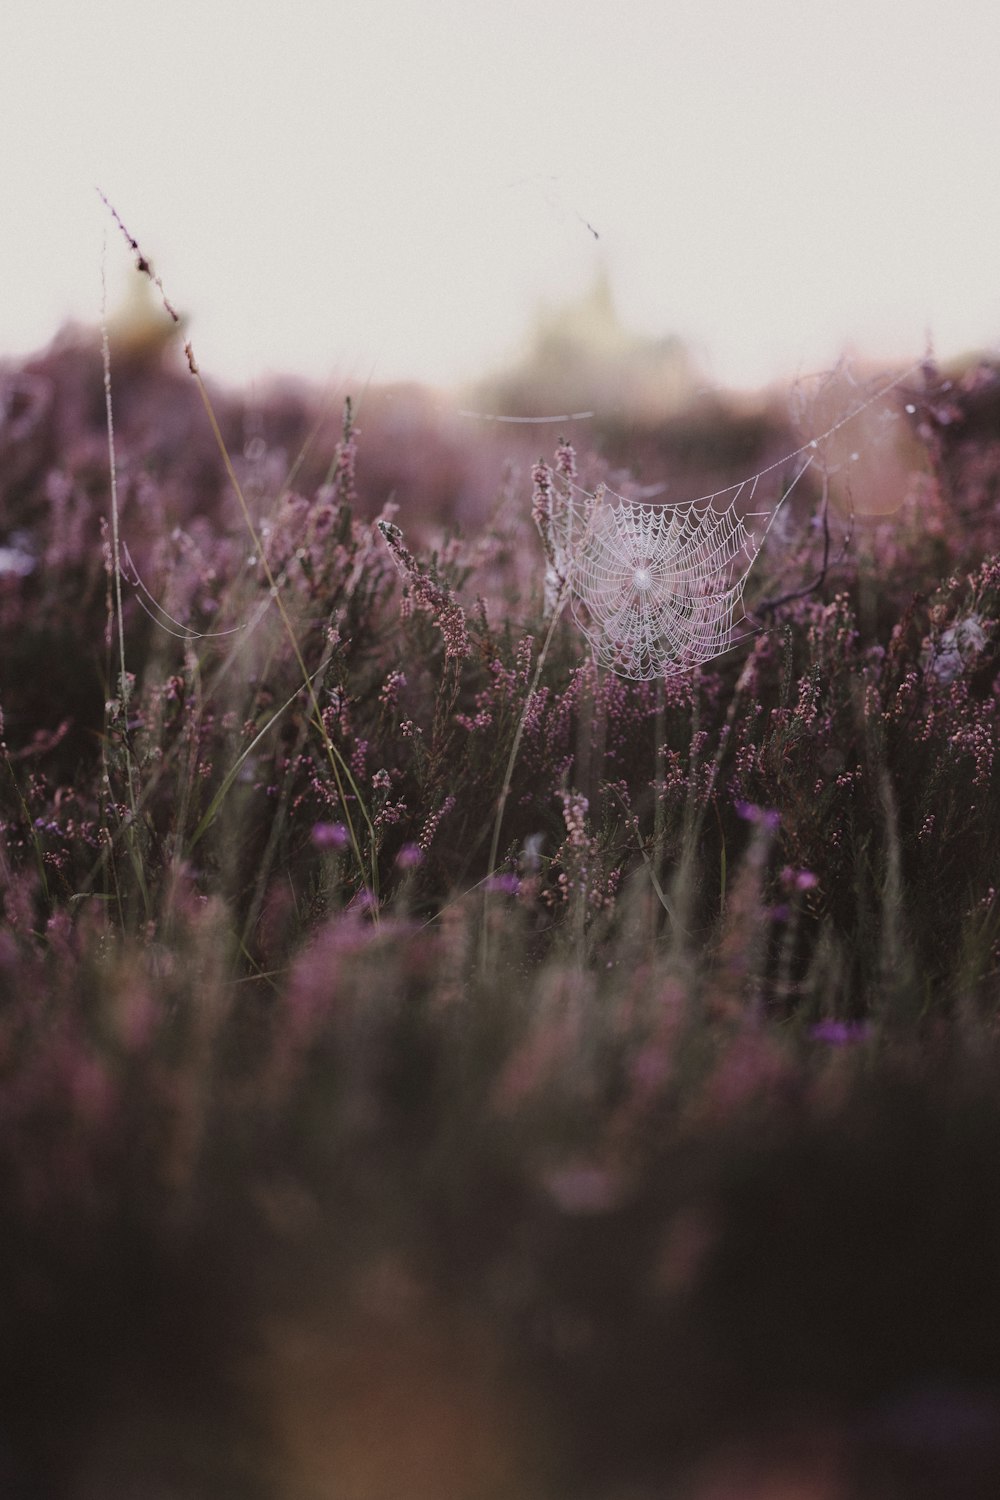 a spider web in the middle of a field of purple flowers